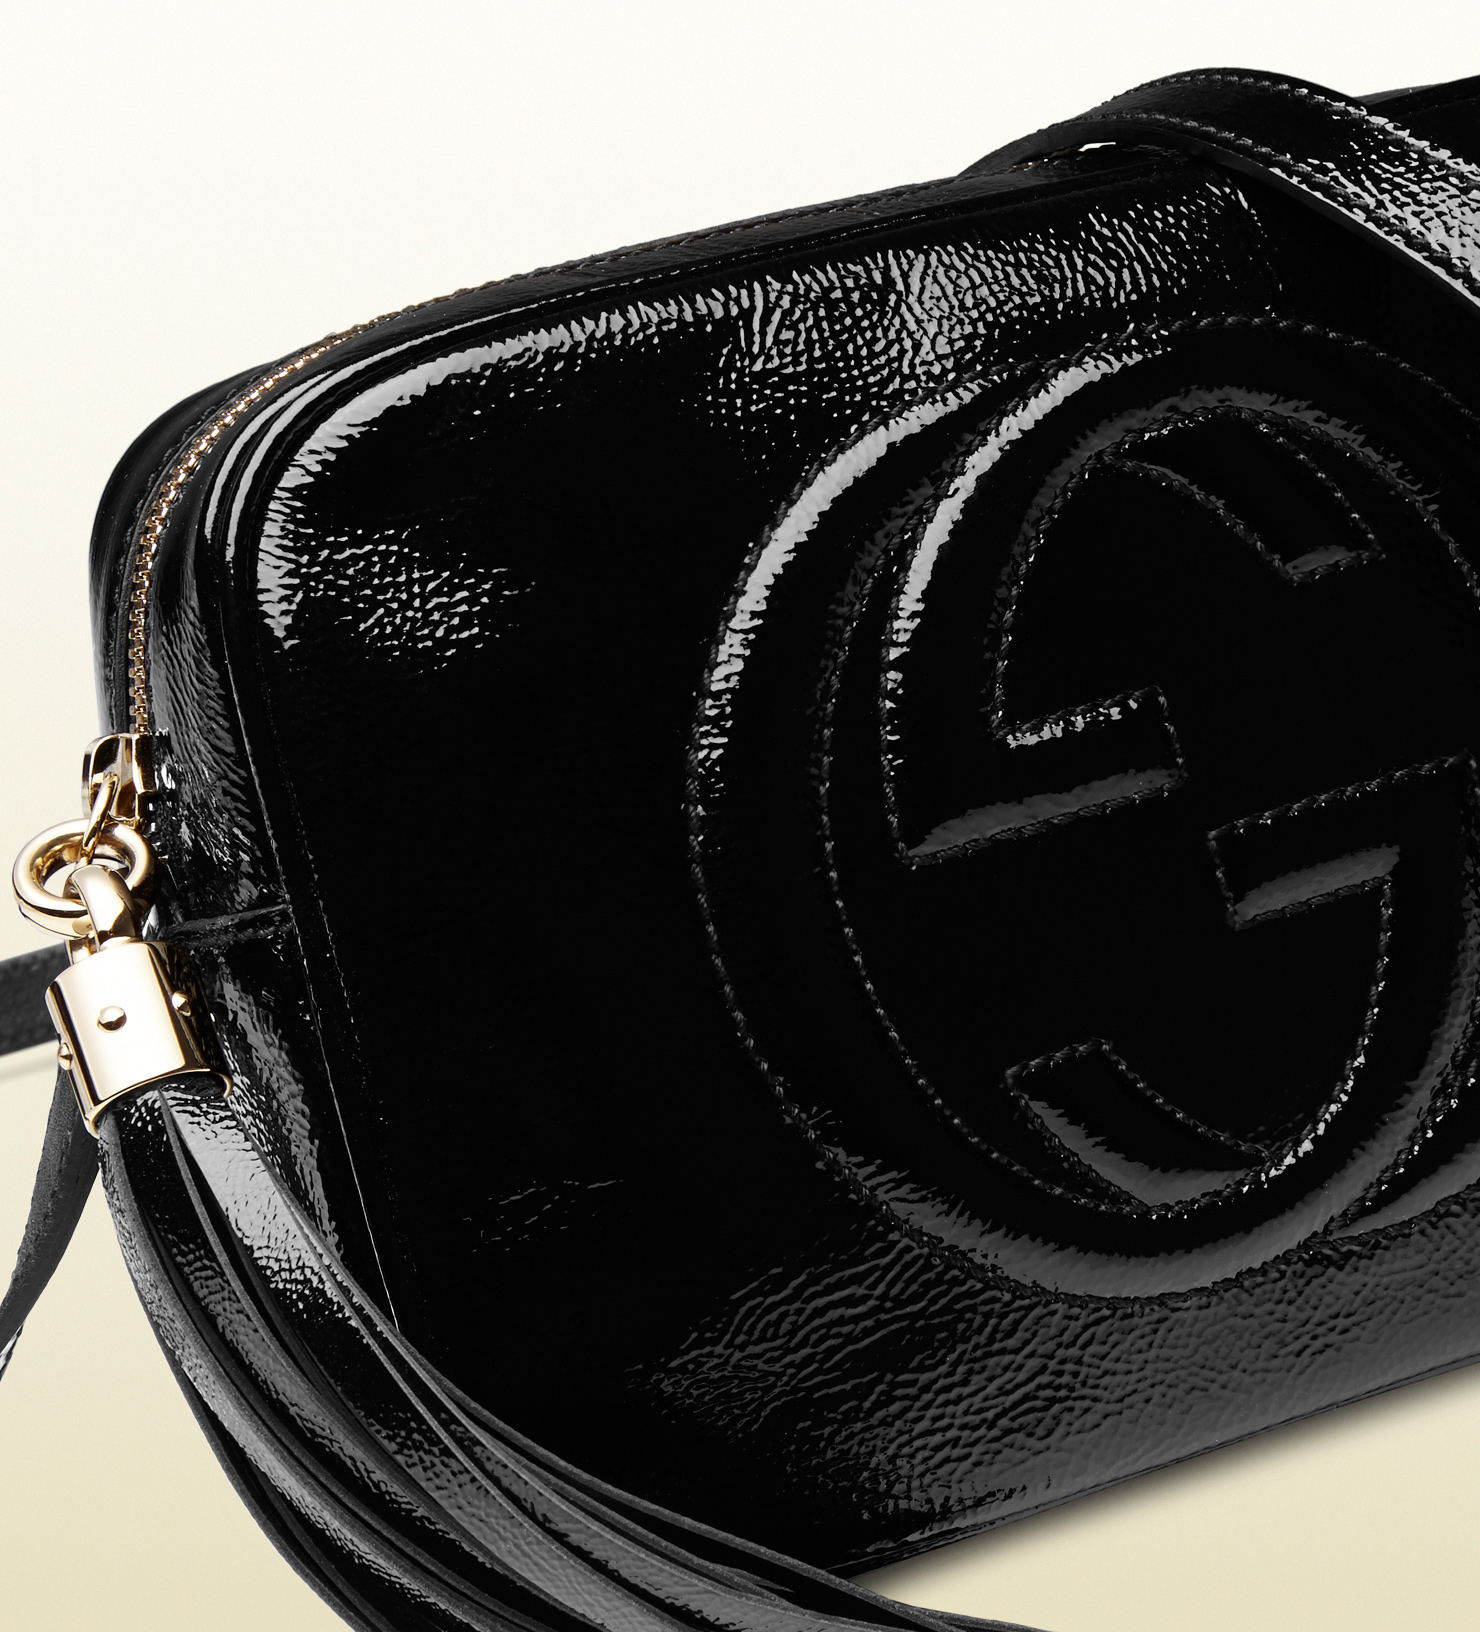 Lyst - Gucci Soho Soft Patent Leather Disco Bag in Black